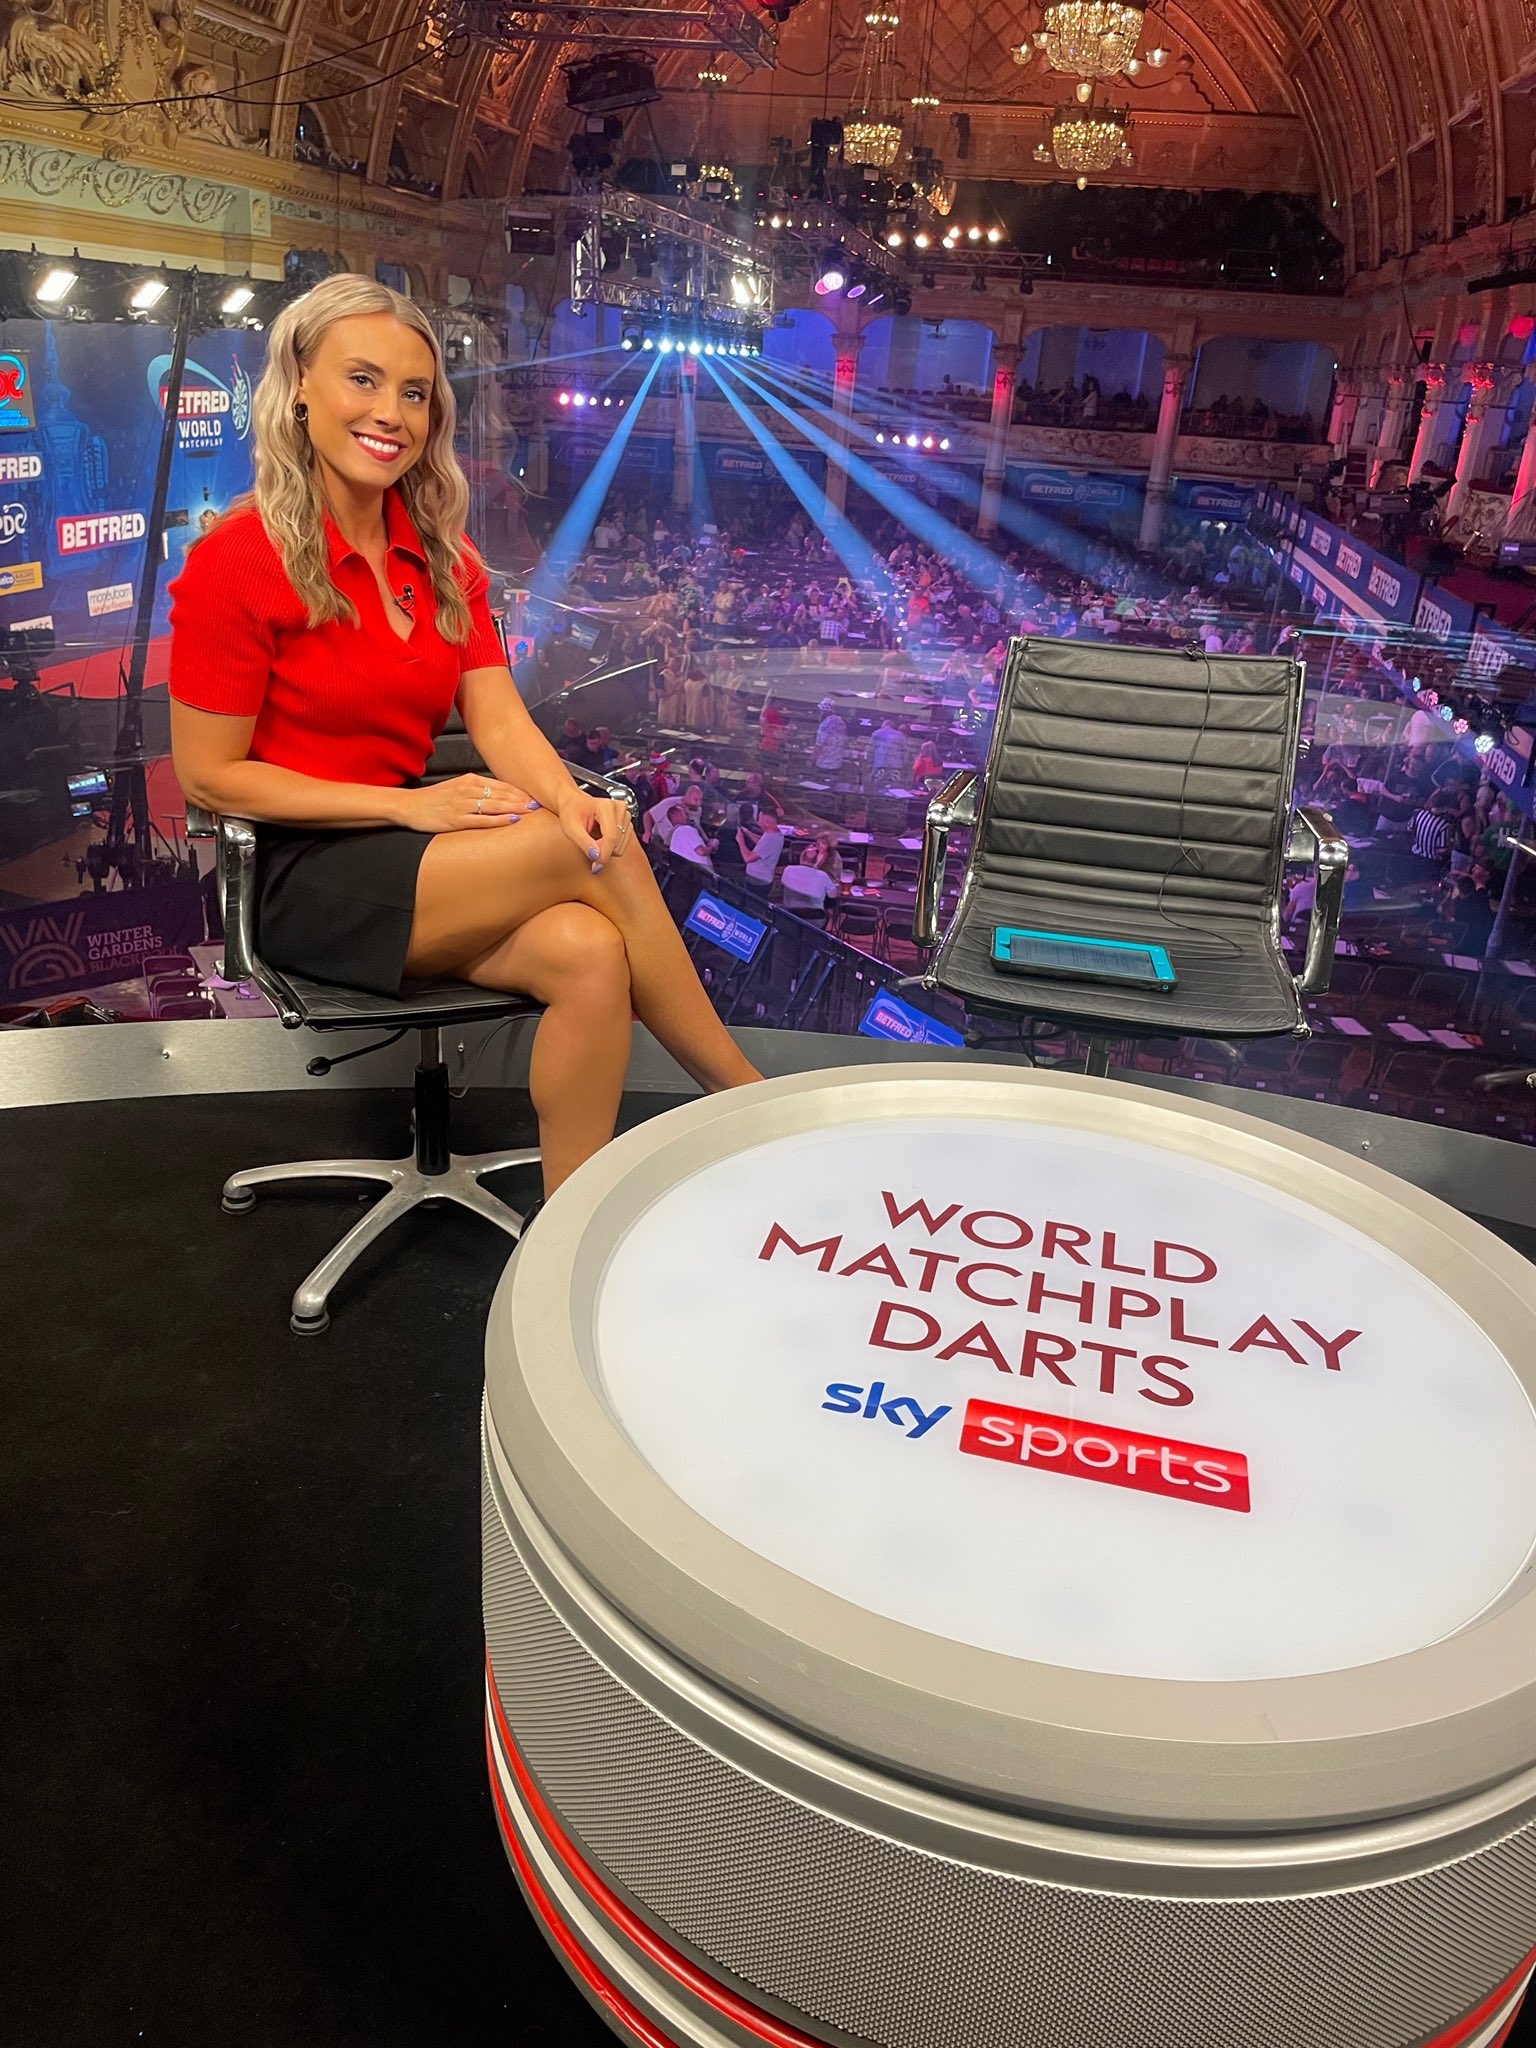 Emma Paton on Twitter: "The quarter-finals continue at the World Matchplay!! Two SF spots still up for grabs. Who gets them!? Dirk Duijvenbode v Danny Noppert Gerwyn Price v Jose de